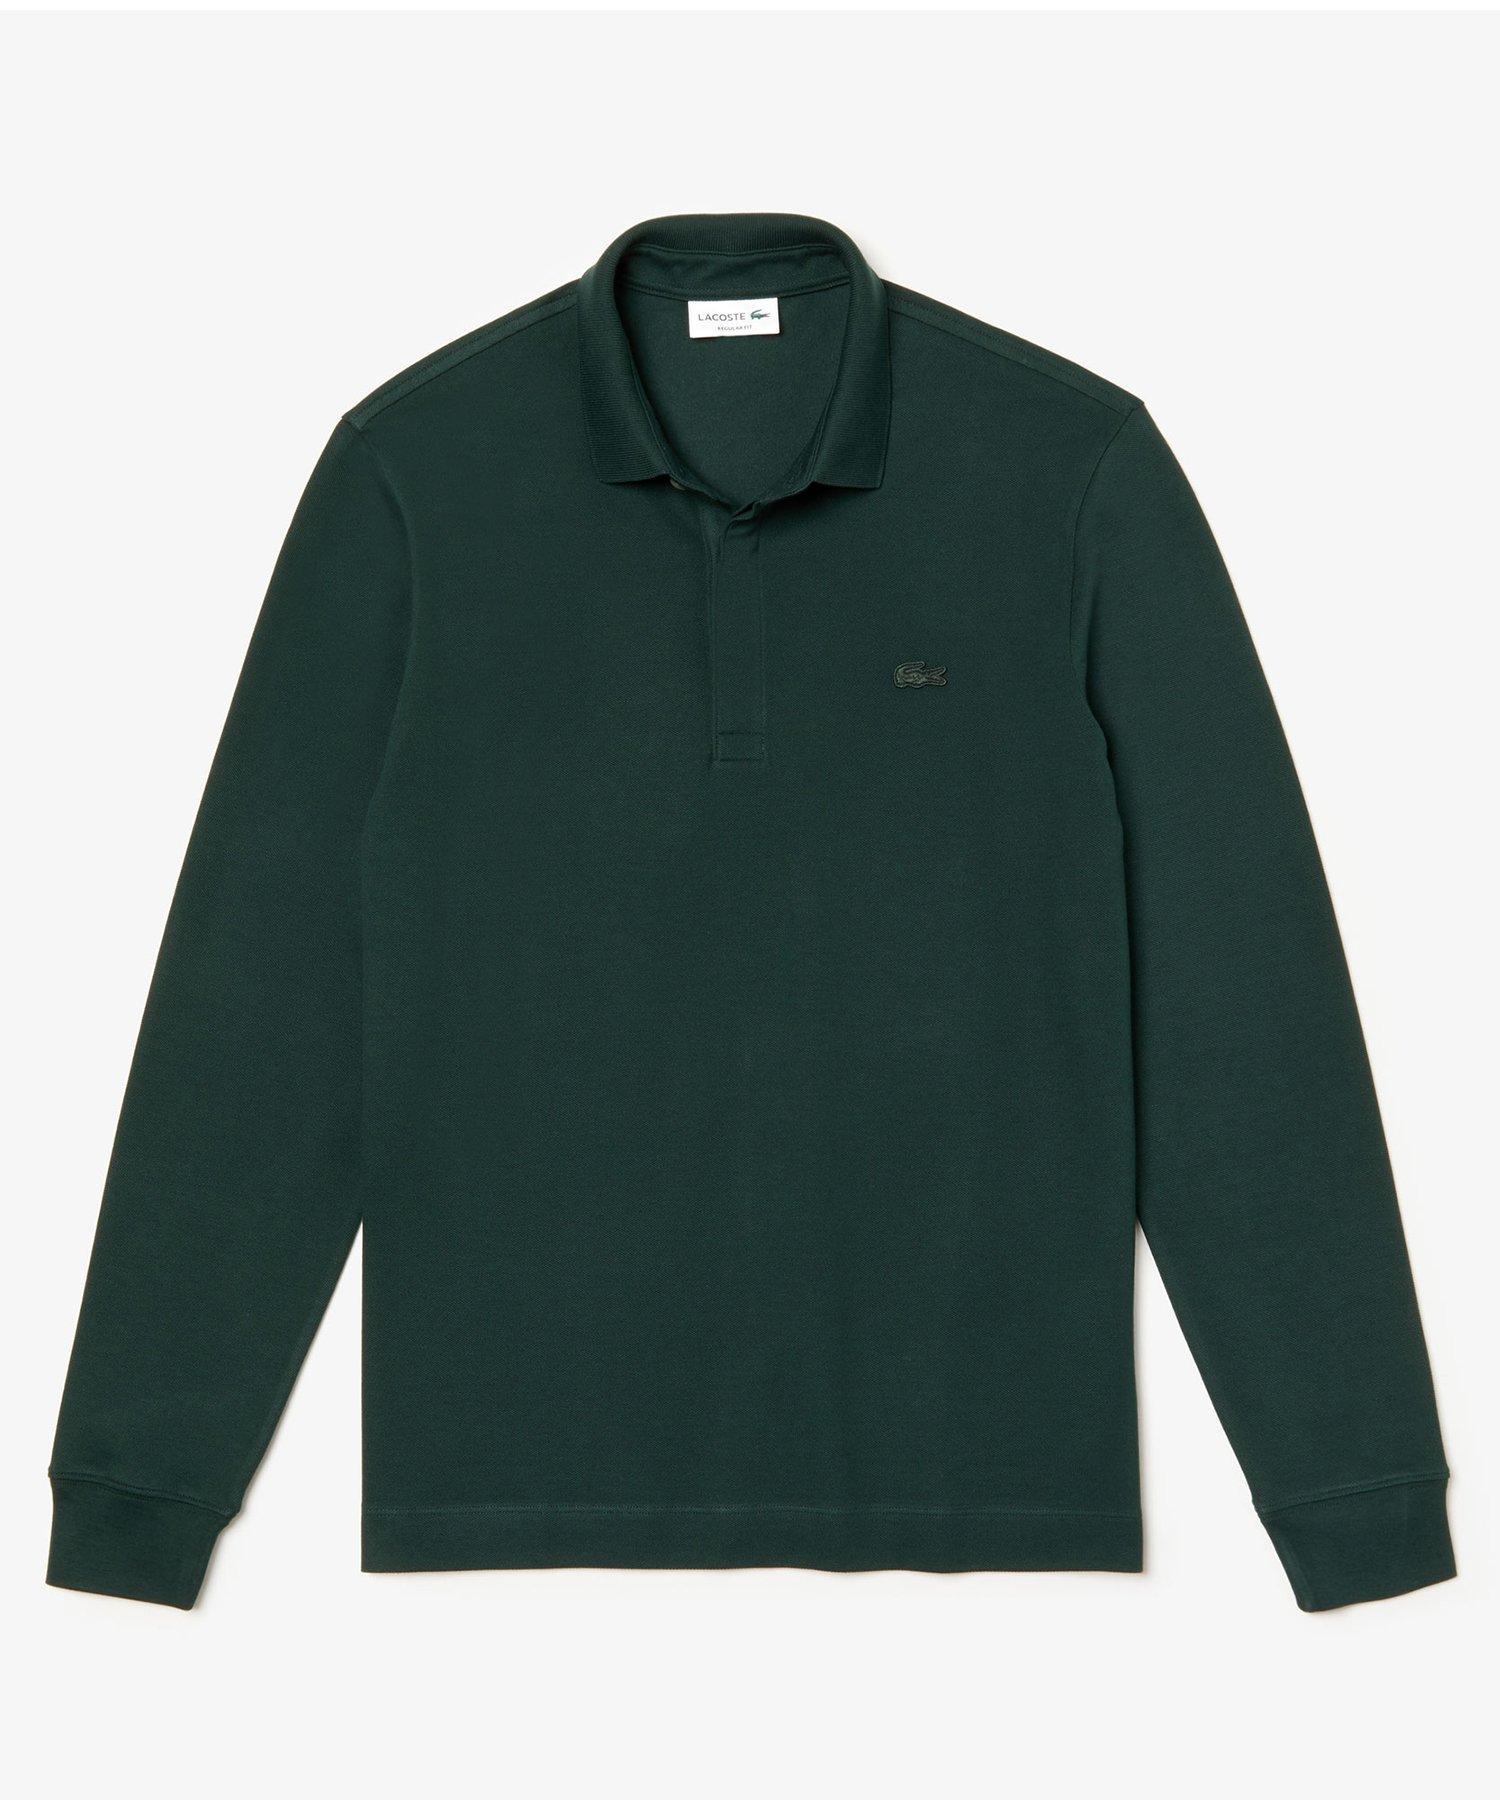 Lacoste Regular Fit Long-sleeve Cotton Paris Polo In Green for Men - Lyst